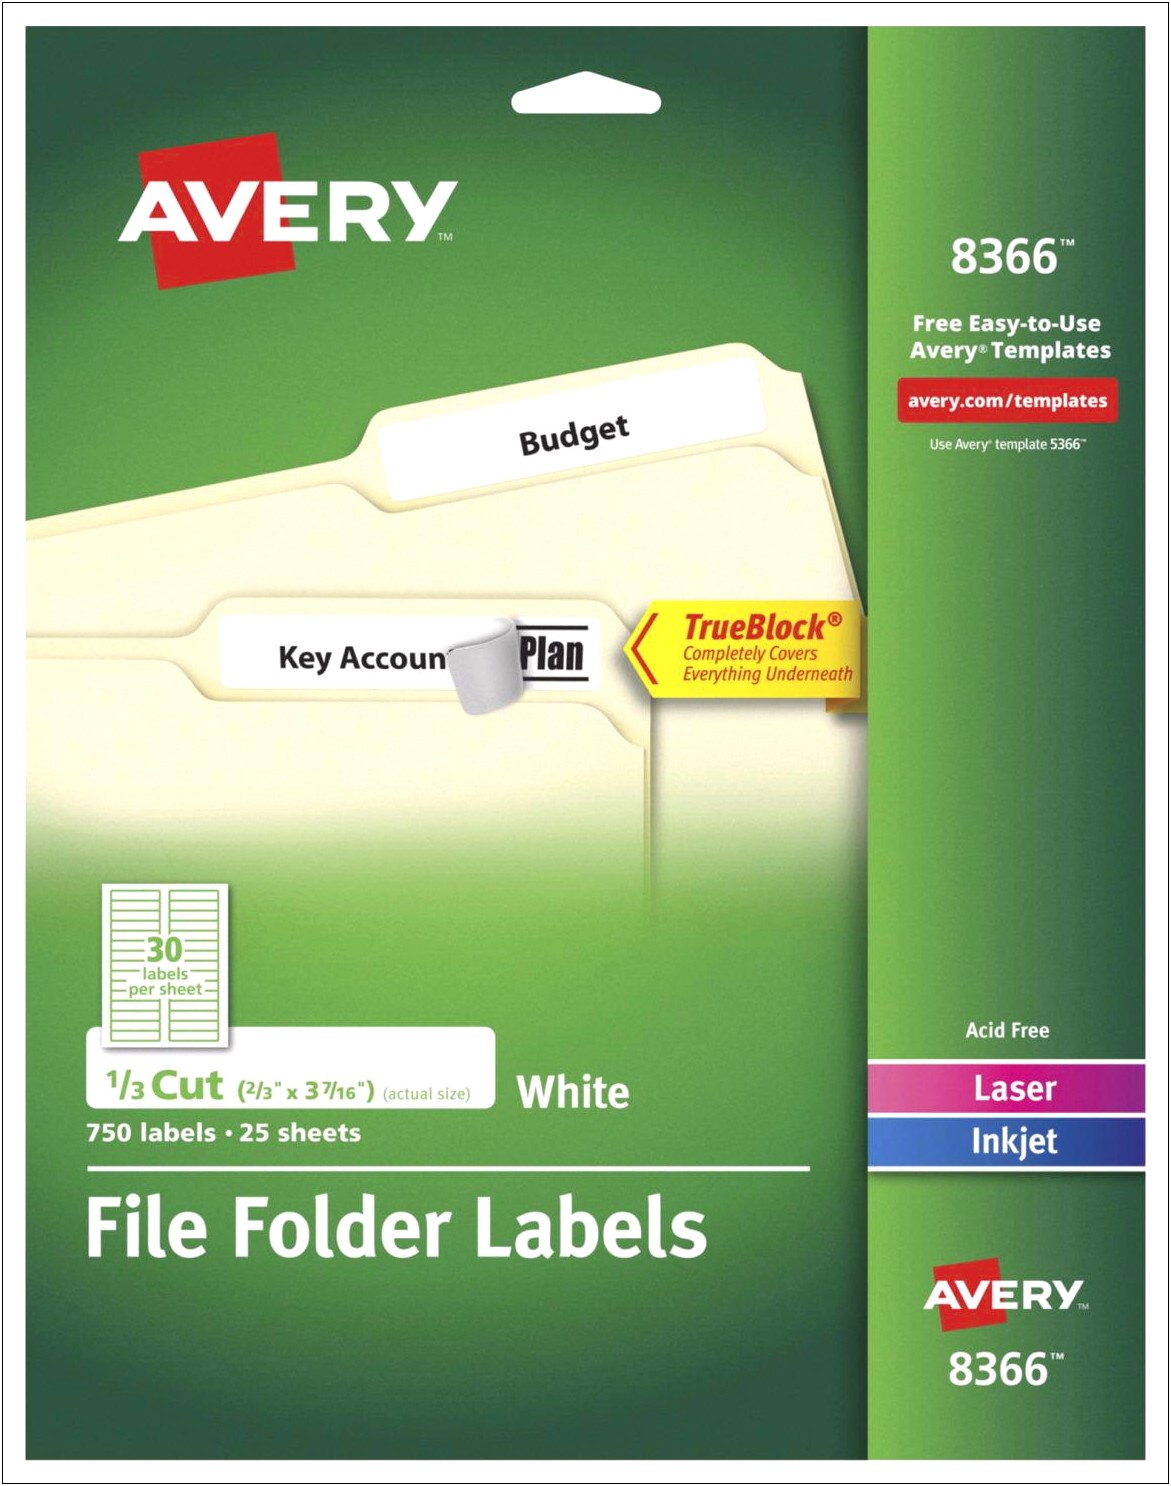 Avery 5266 Template For Word 2013